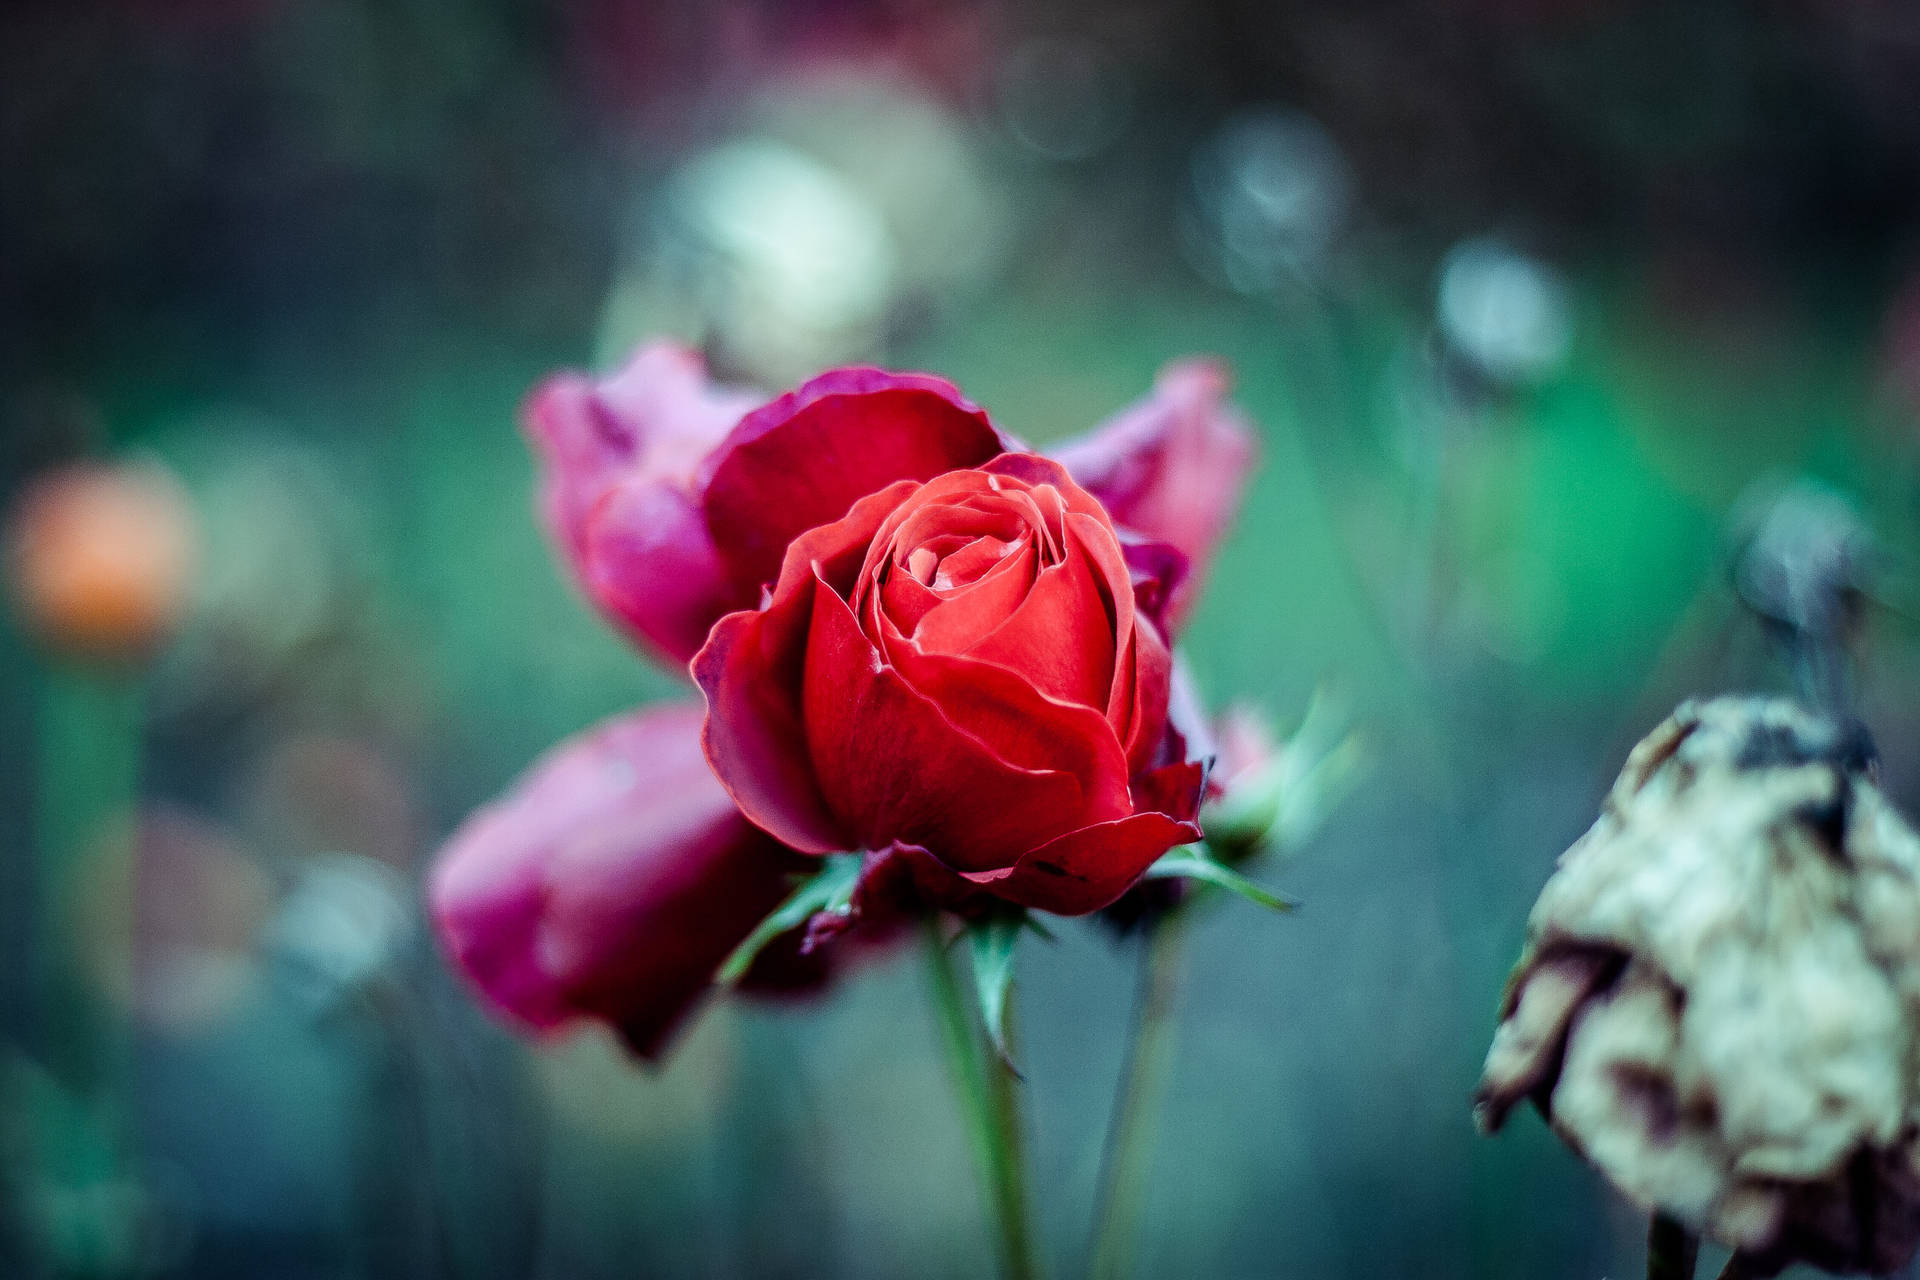 A single red rose with green foliage Wallpaper